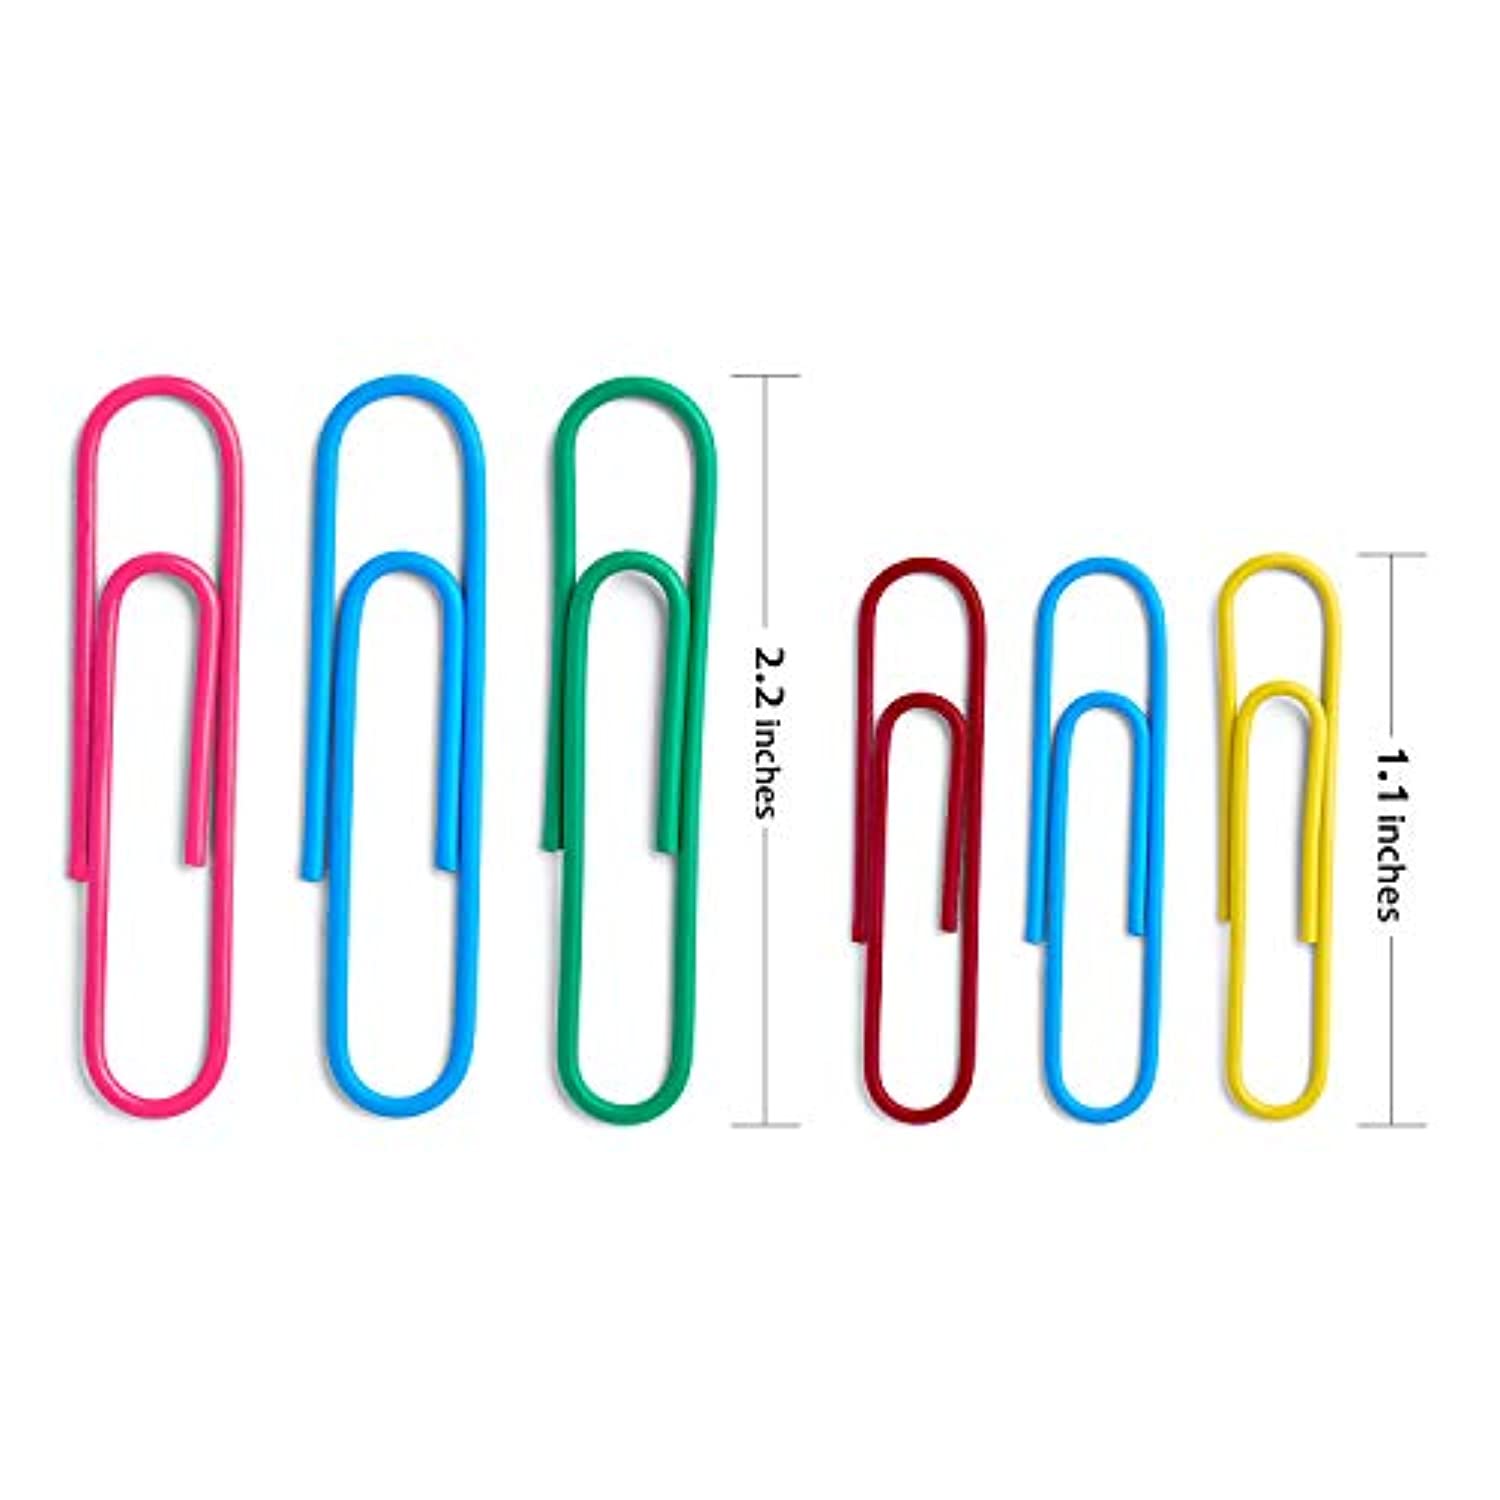 The image of paper clips of various colors. Colored paper clips